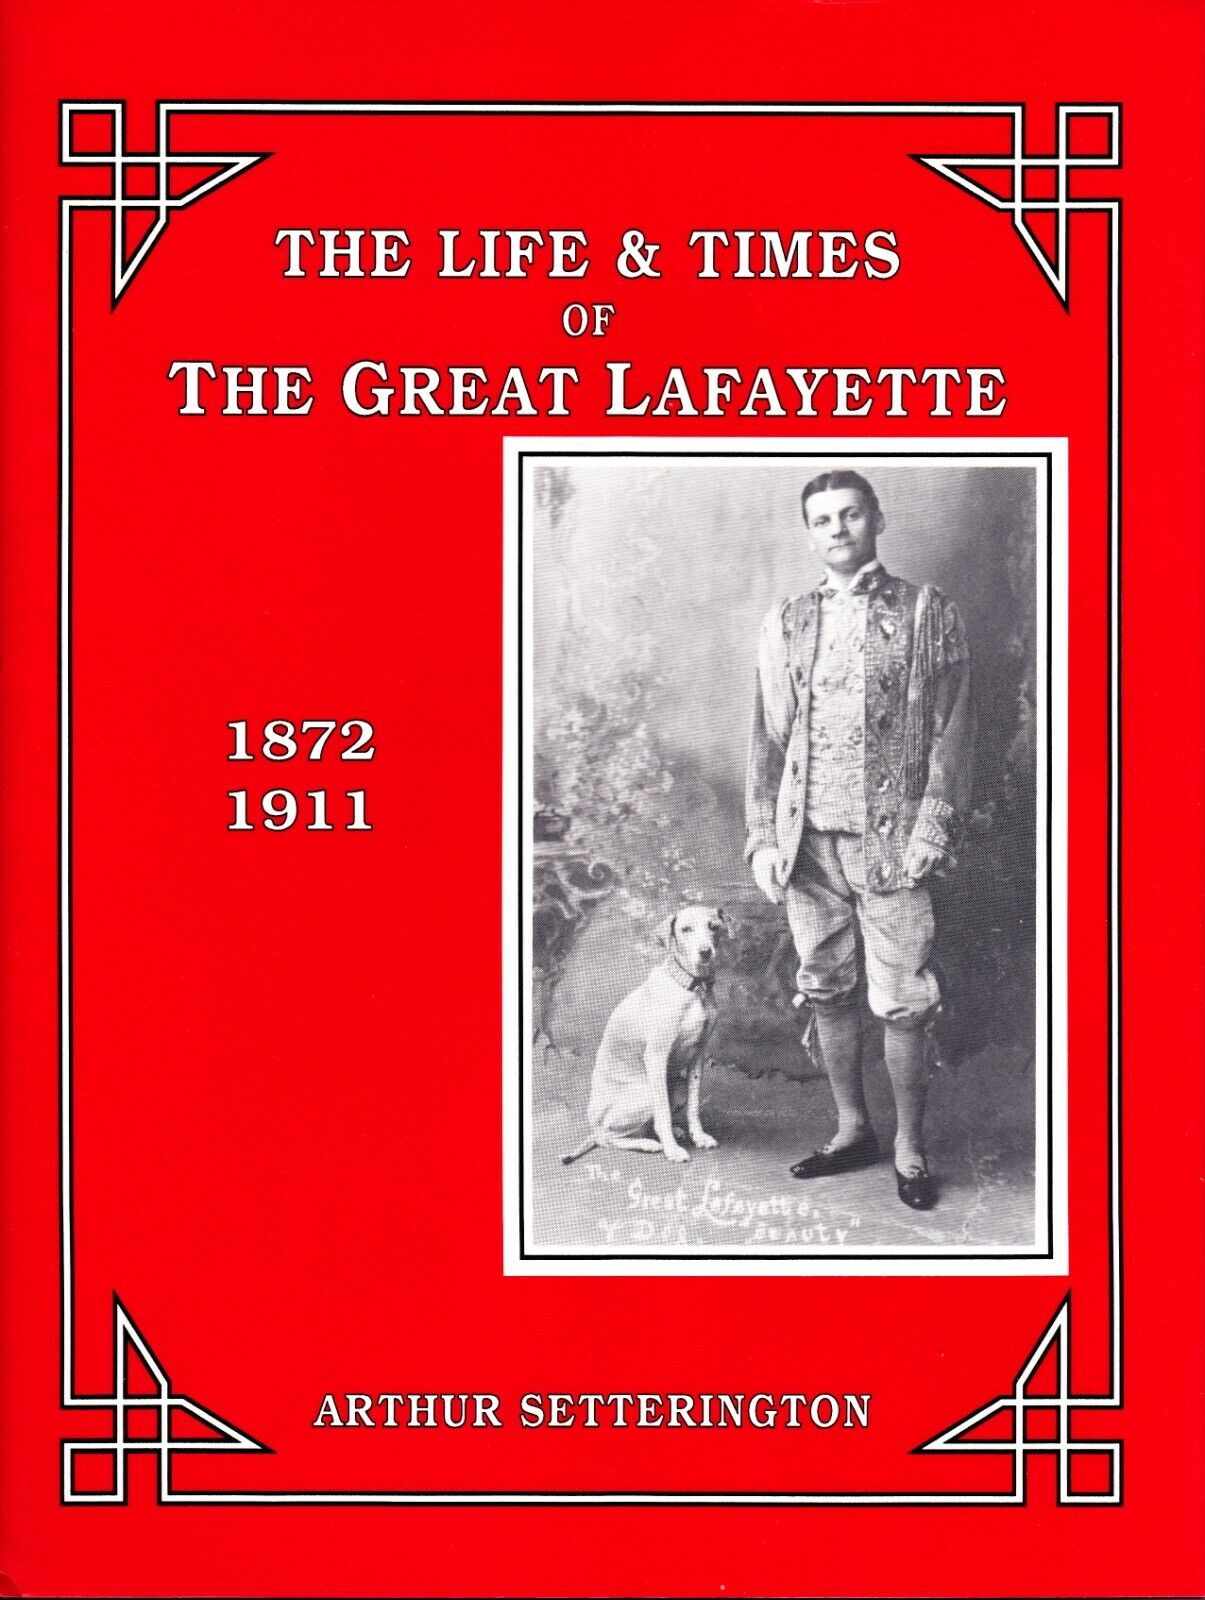 The Life and Times of the Great Lafayette.jpg